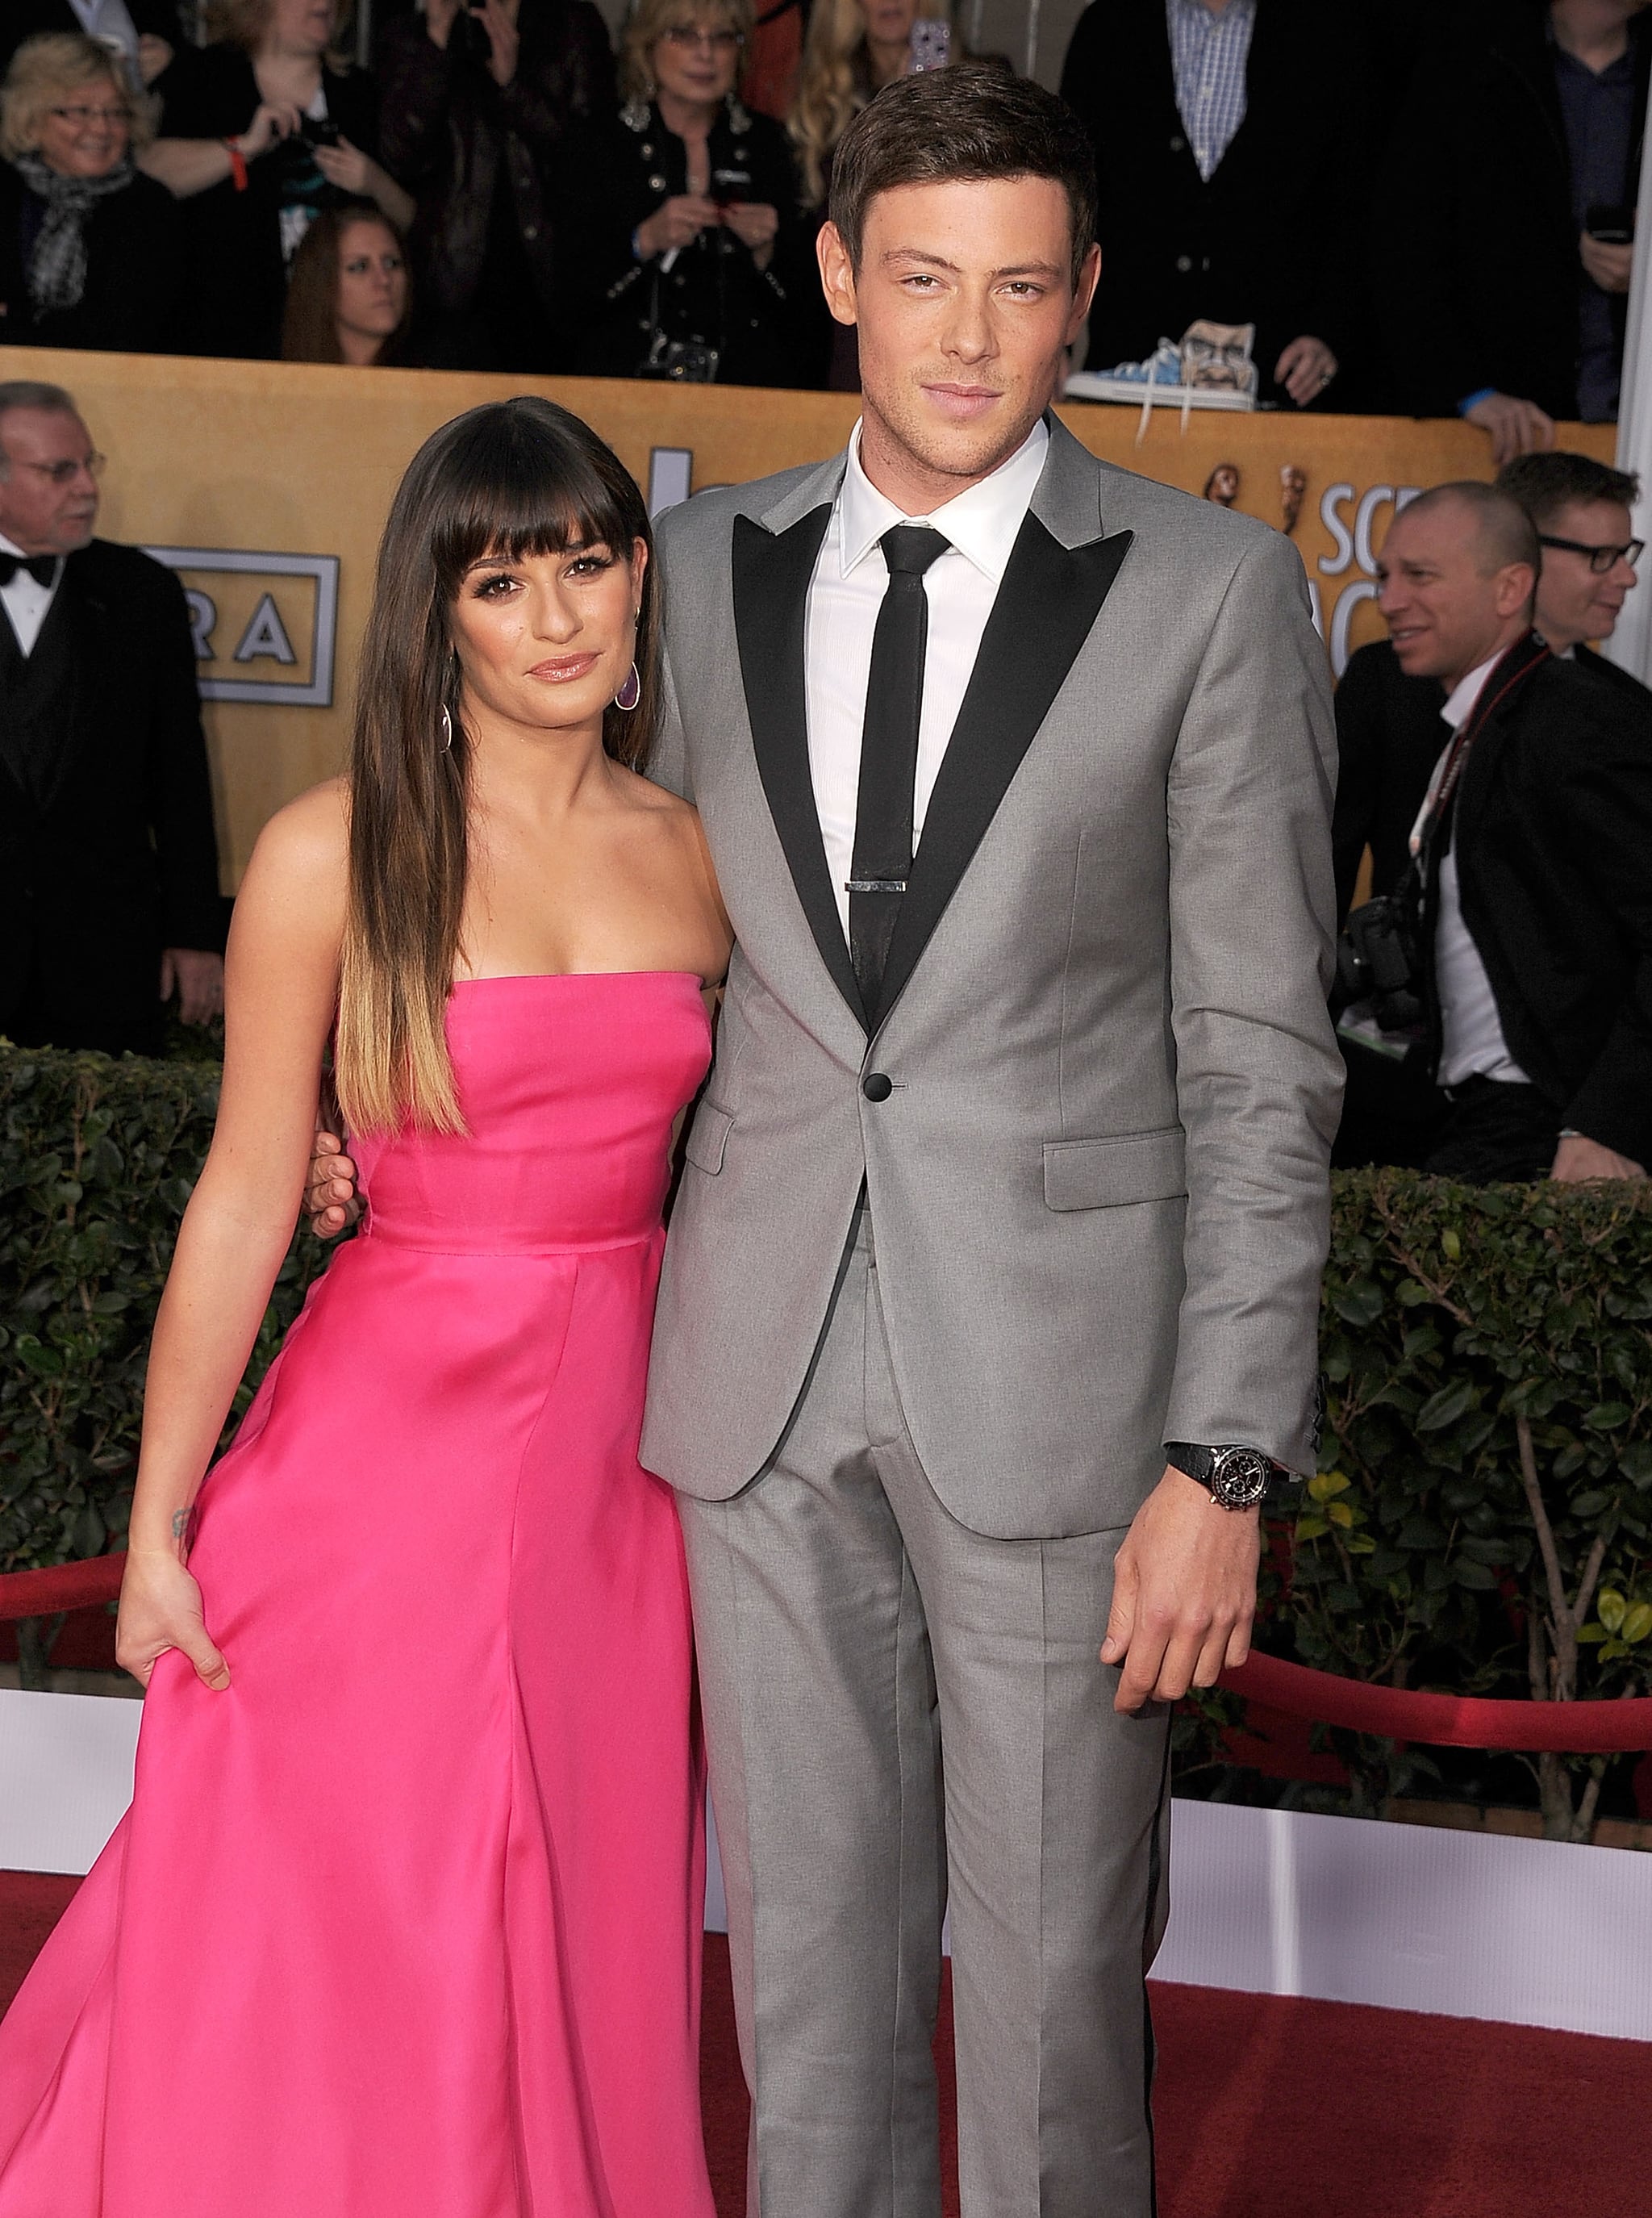 LOS ANGELES, CA - JANUARY 27:  Lea Michele and Cory Monteith arrives at the 19th Annual Screen Actors Guild Awards at The Shrine Auditorium on January 27, 2013 in Los Angeles, California.  (Photo by Steve Granitz/WireImage)